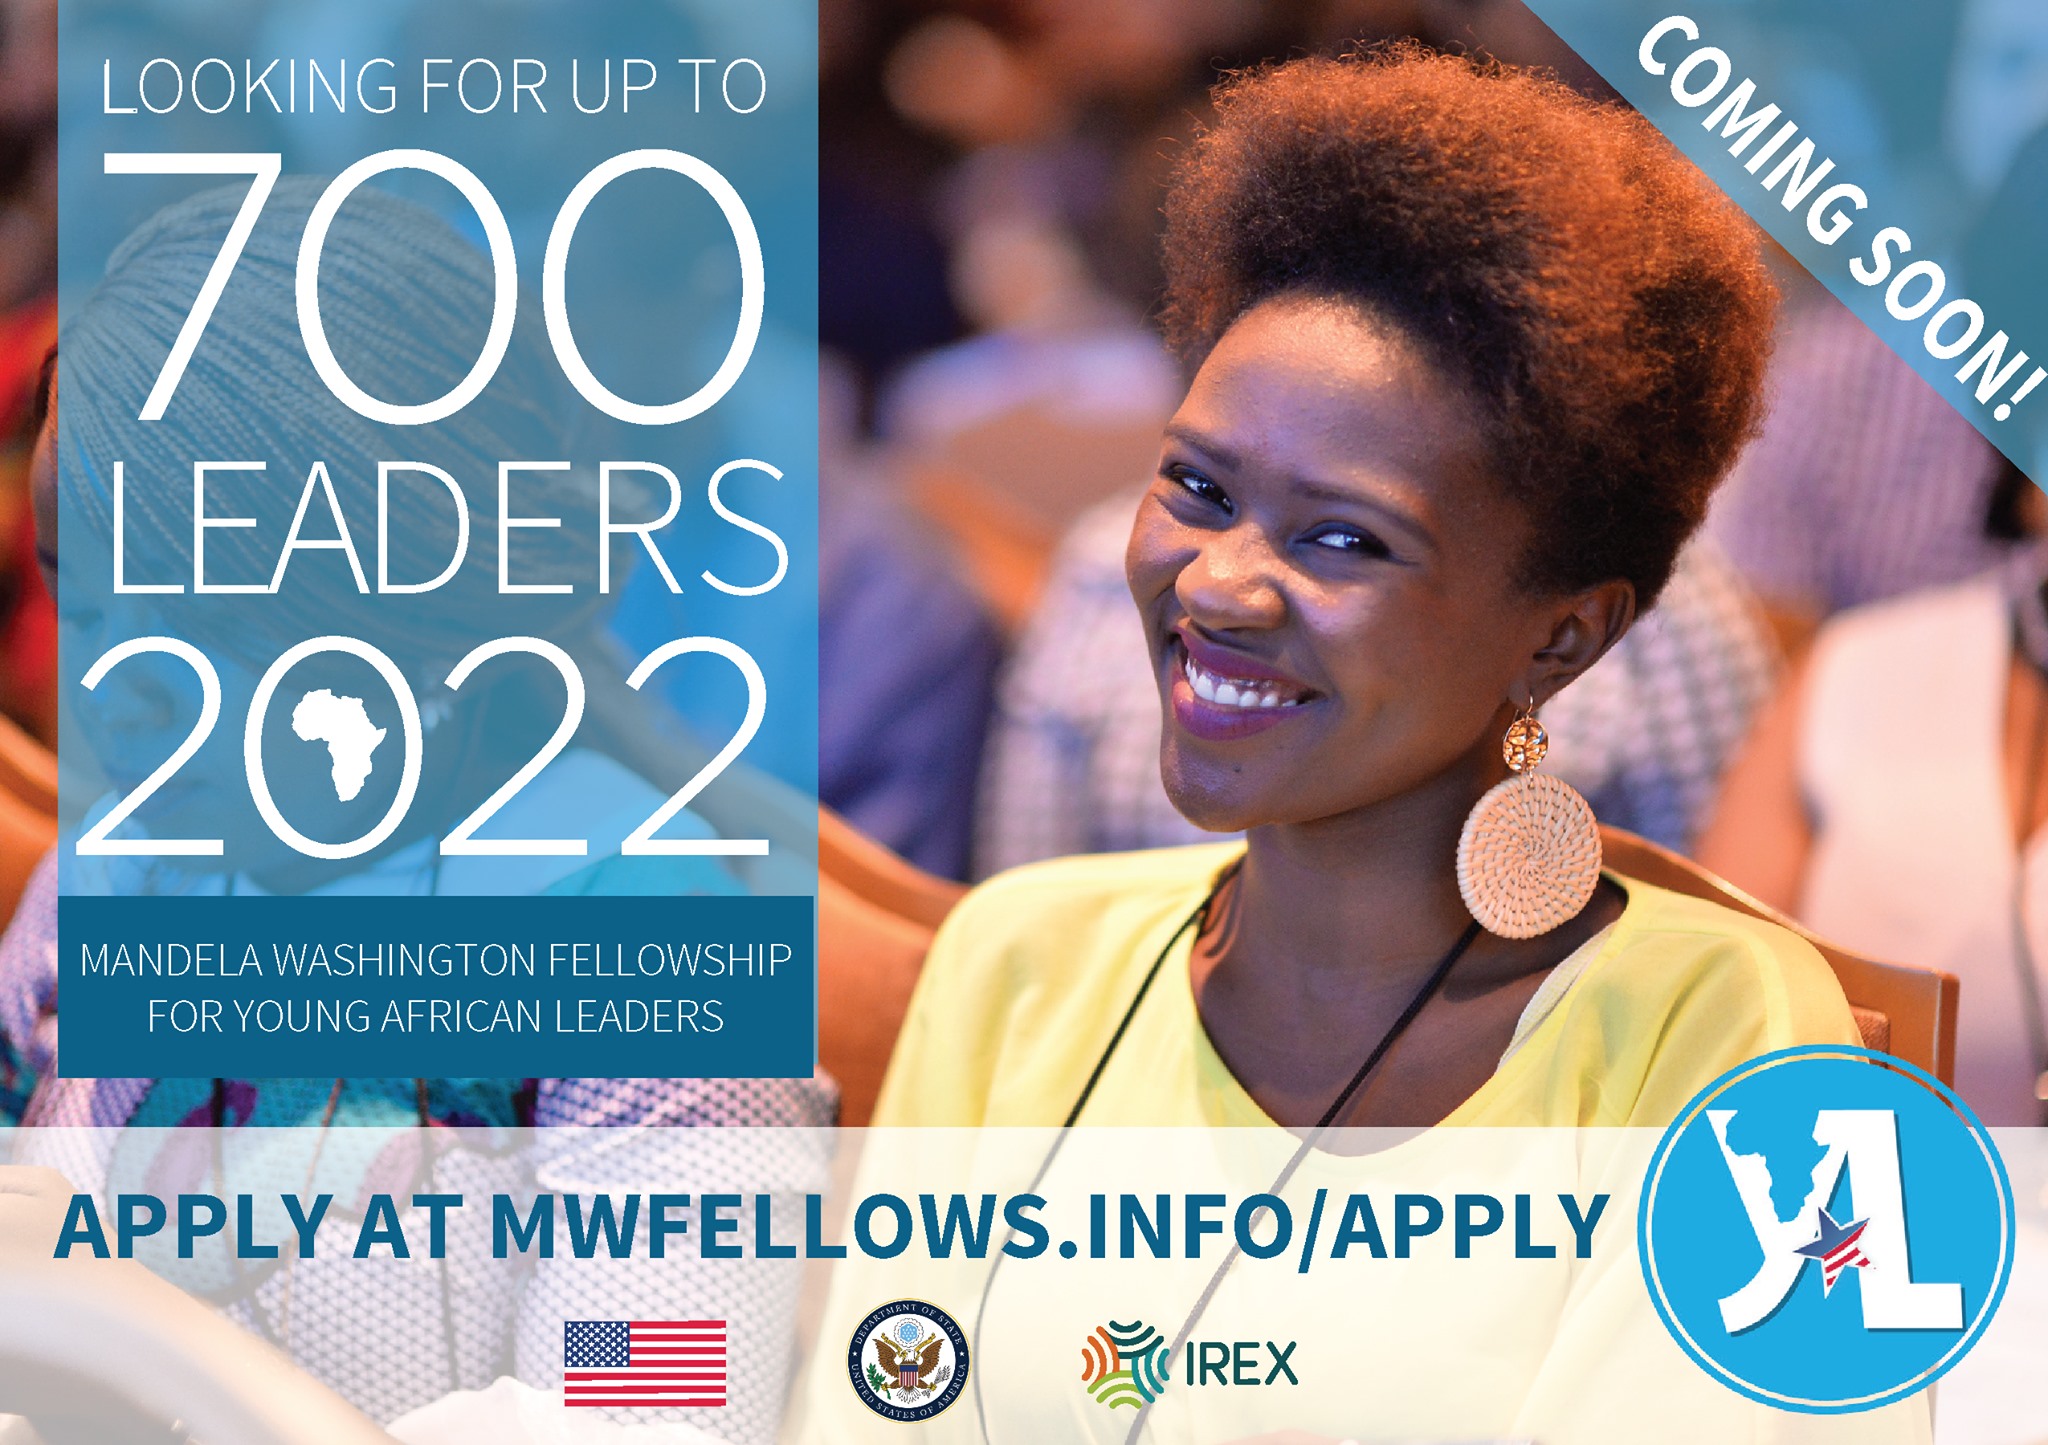 Apply for 2022 Mandela Washington Fellowship and Get all Expensive Paid trip to America for your Work and Business Recognition.